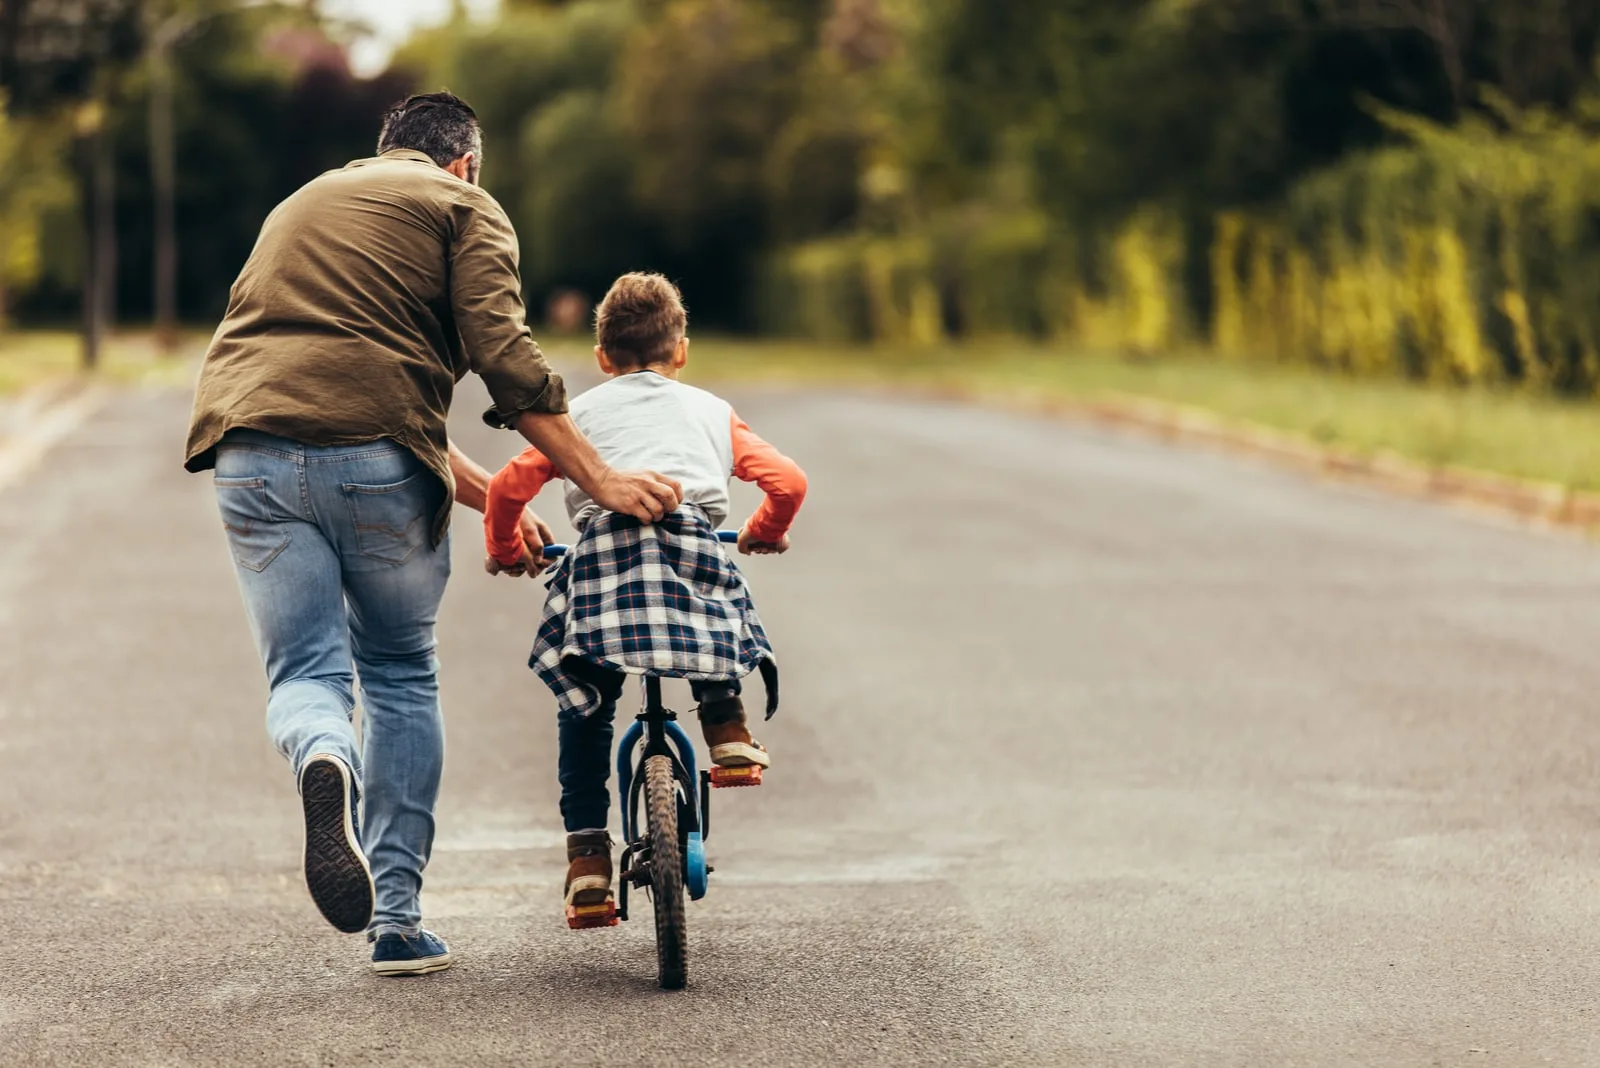 boy riding a bicycle while his father runs along holding the kid